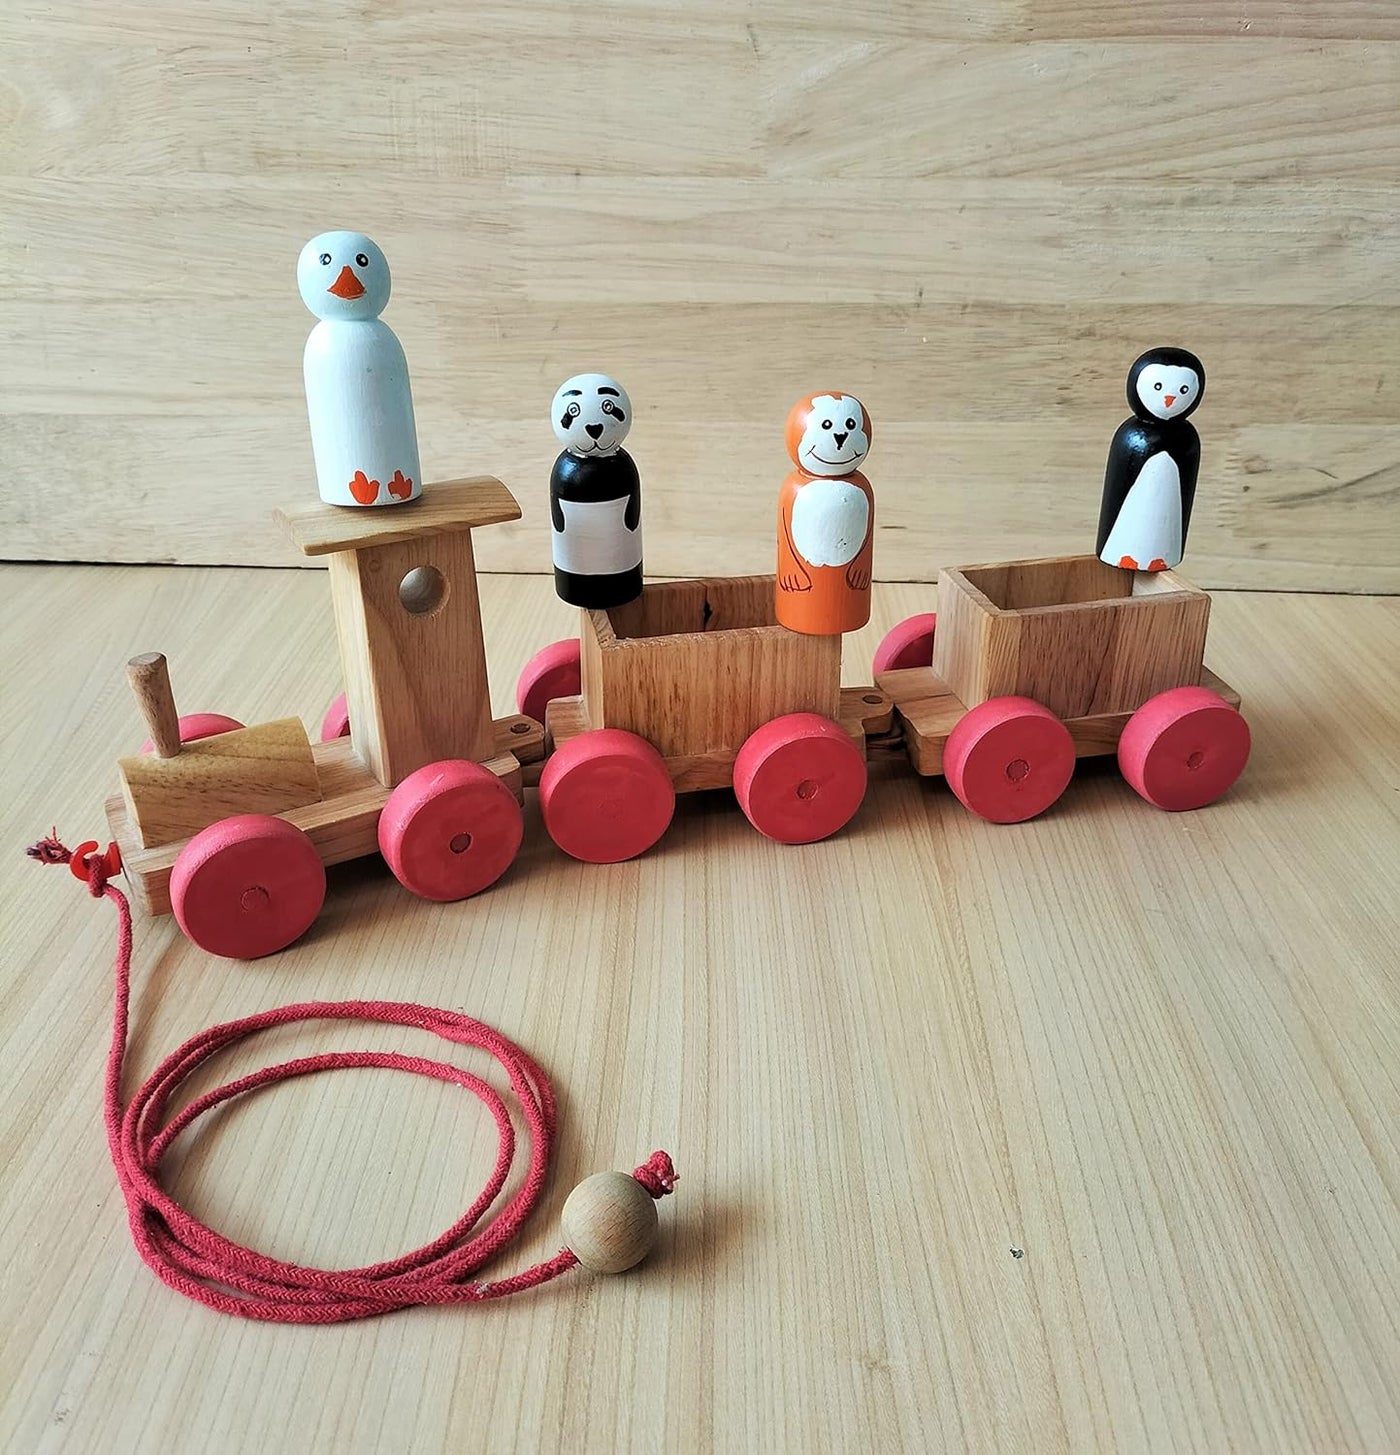 Pull Along Toy Wooden Train with 4 Animals Peg Dolls for 12 Months & Above Kids, Toddlers, Infant & Preschool Toys - Multicolor - Wooden Toys Train Indian Passenger Set